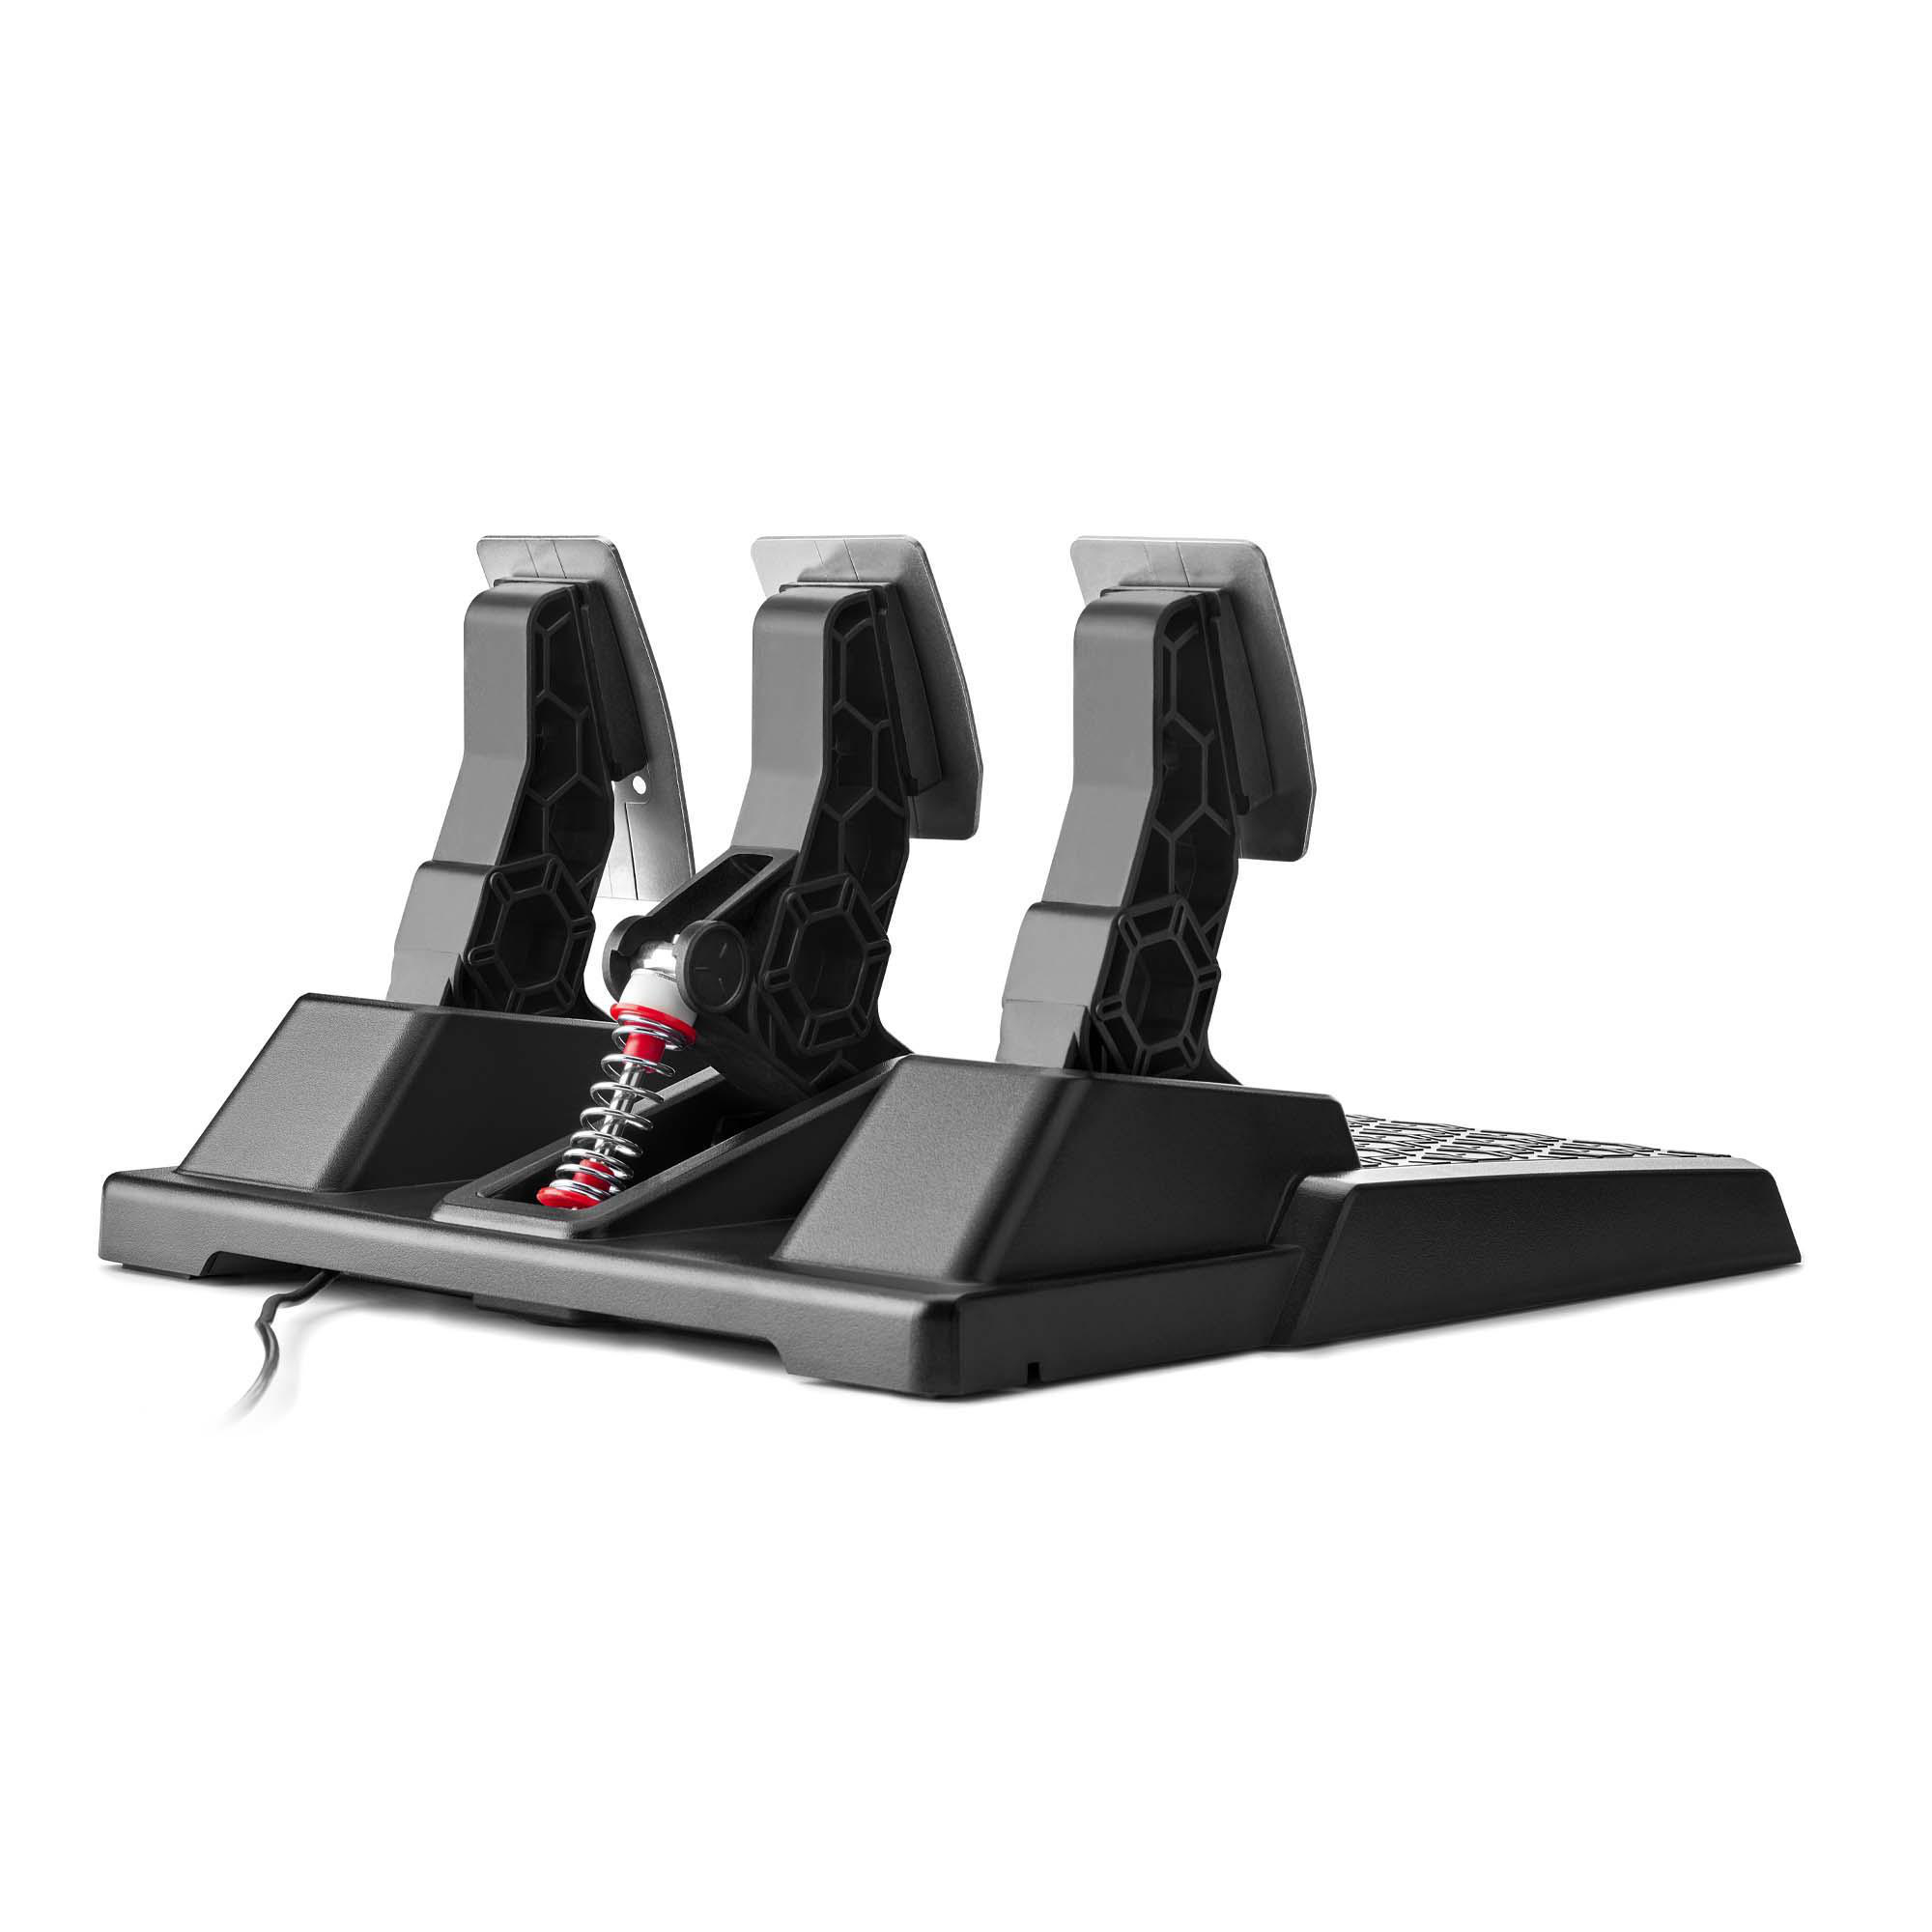 THRUSTMASTER T3PM: Thrustmaster 3 Pedal Magnetic